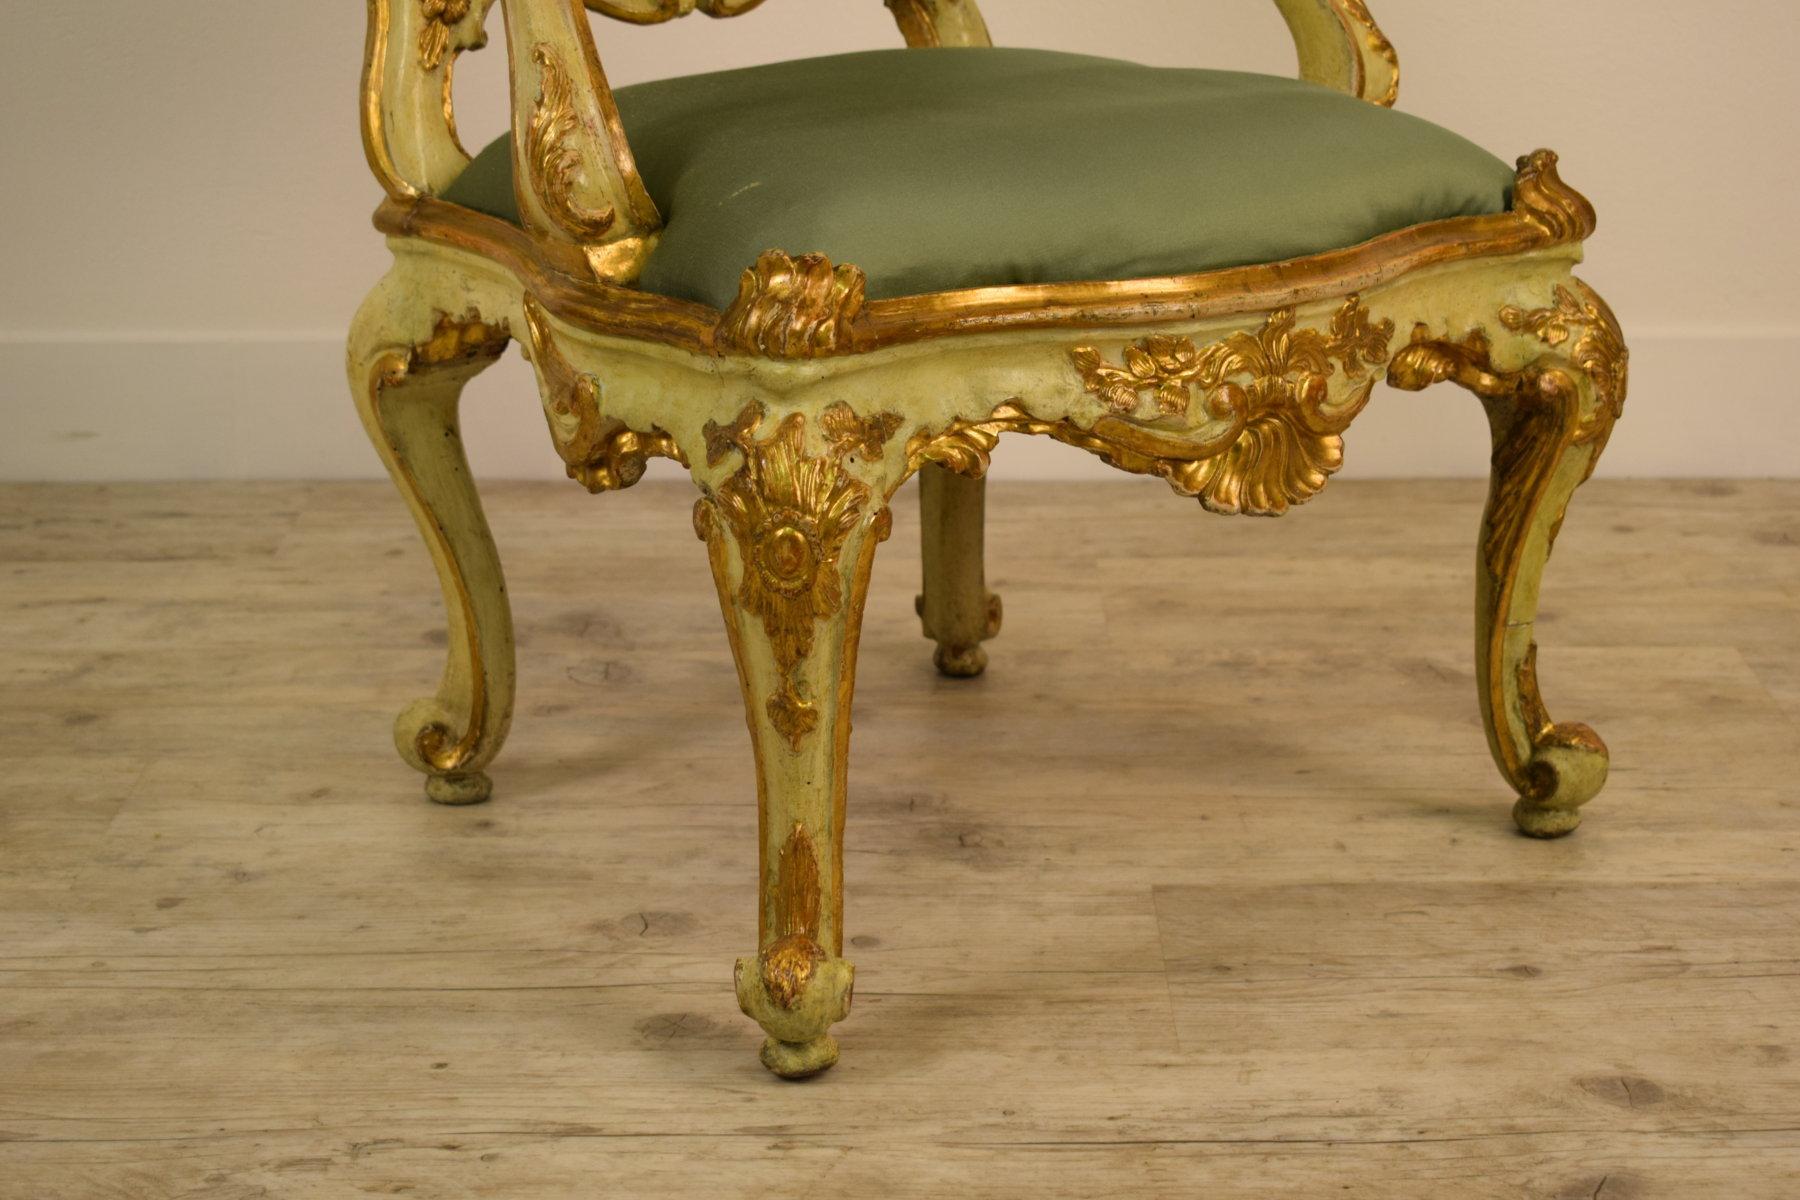 18th Century Venetian Lacquered and Gilded Wood Armchair (Louis XV.)